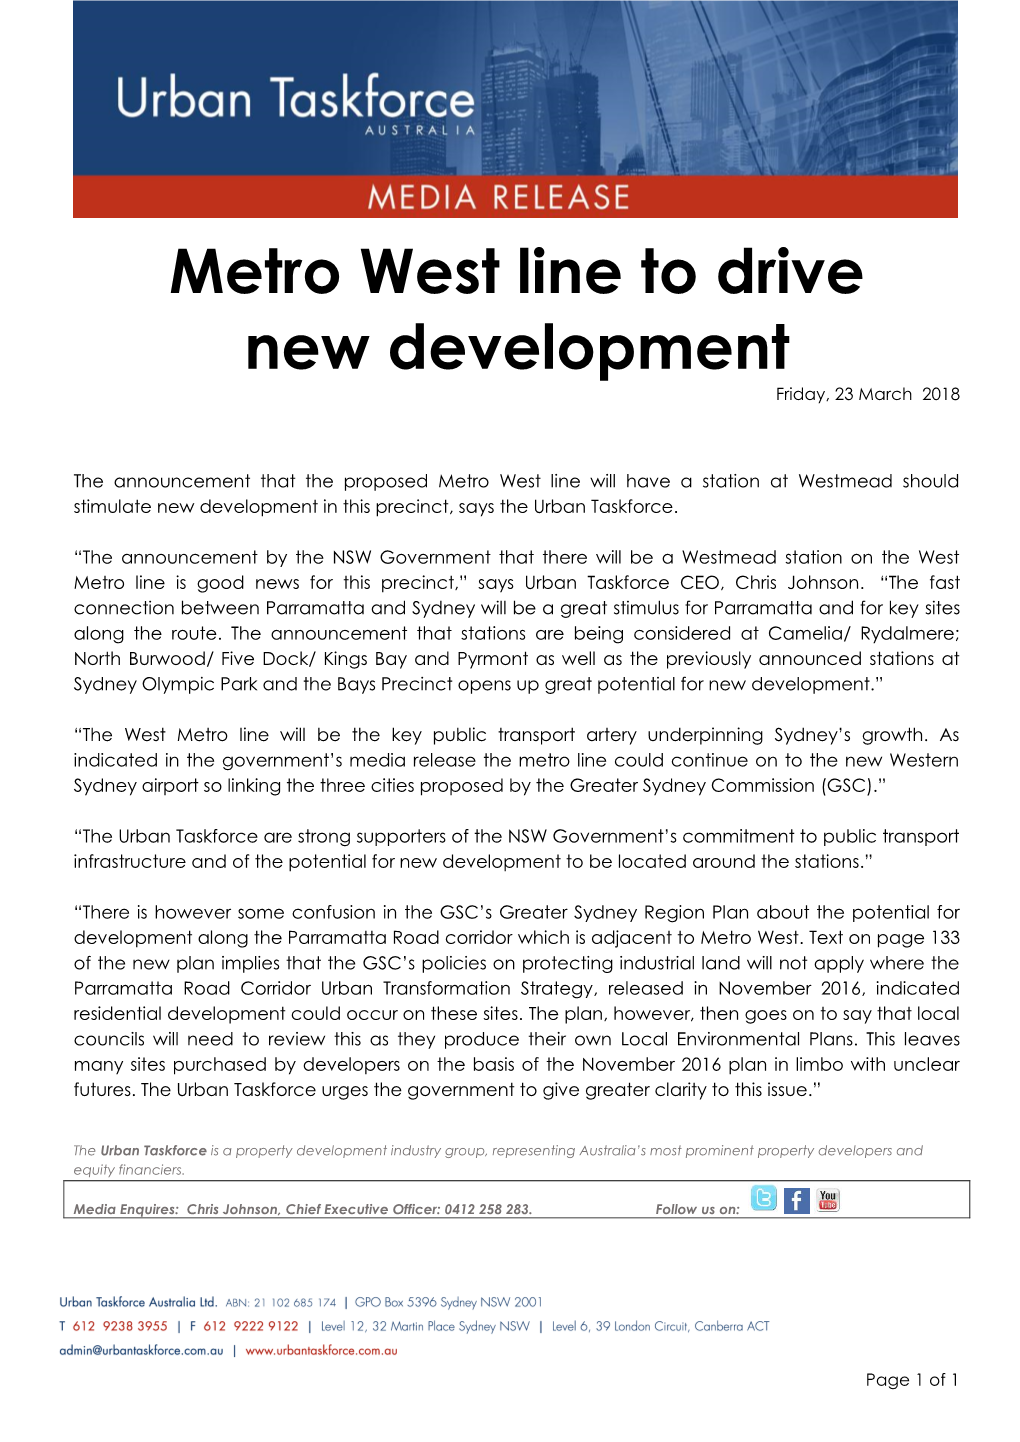 Metro West Line to Drive New Development Friday, 23 March 2018